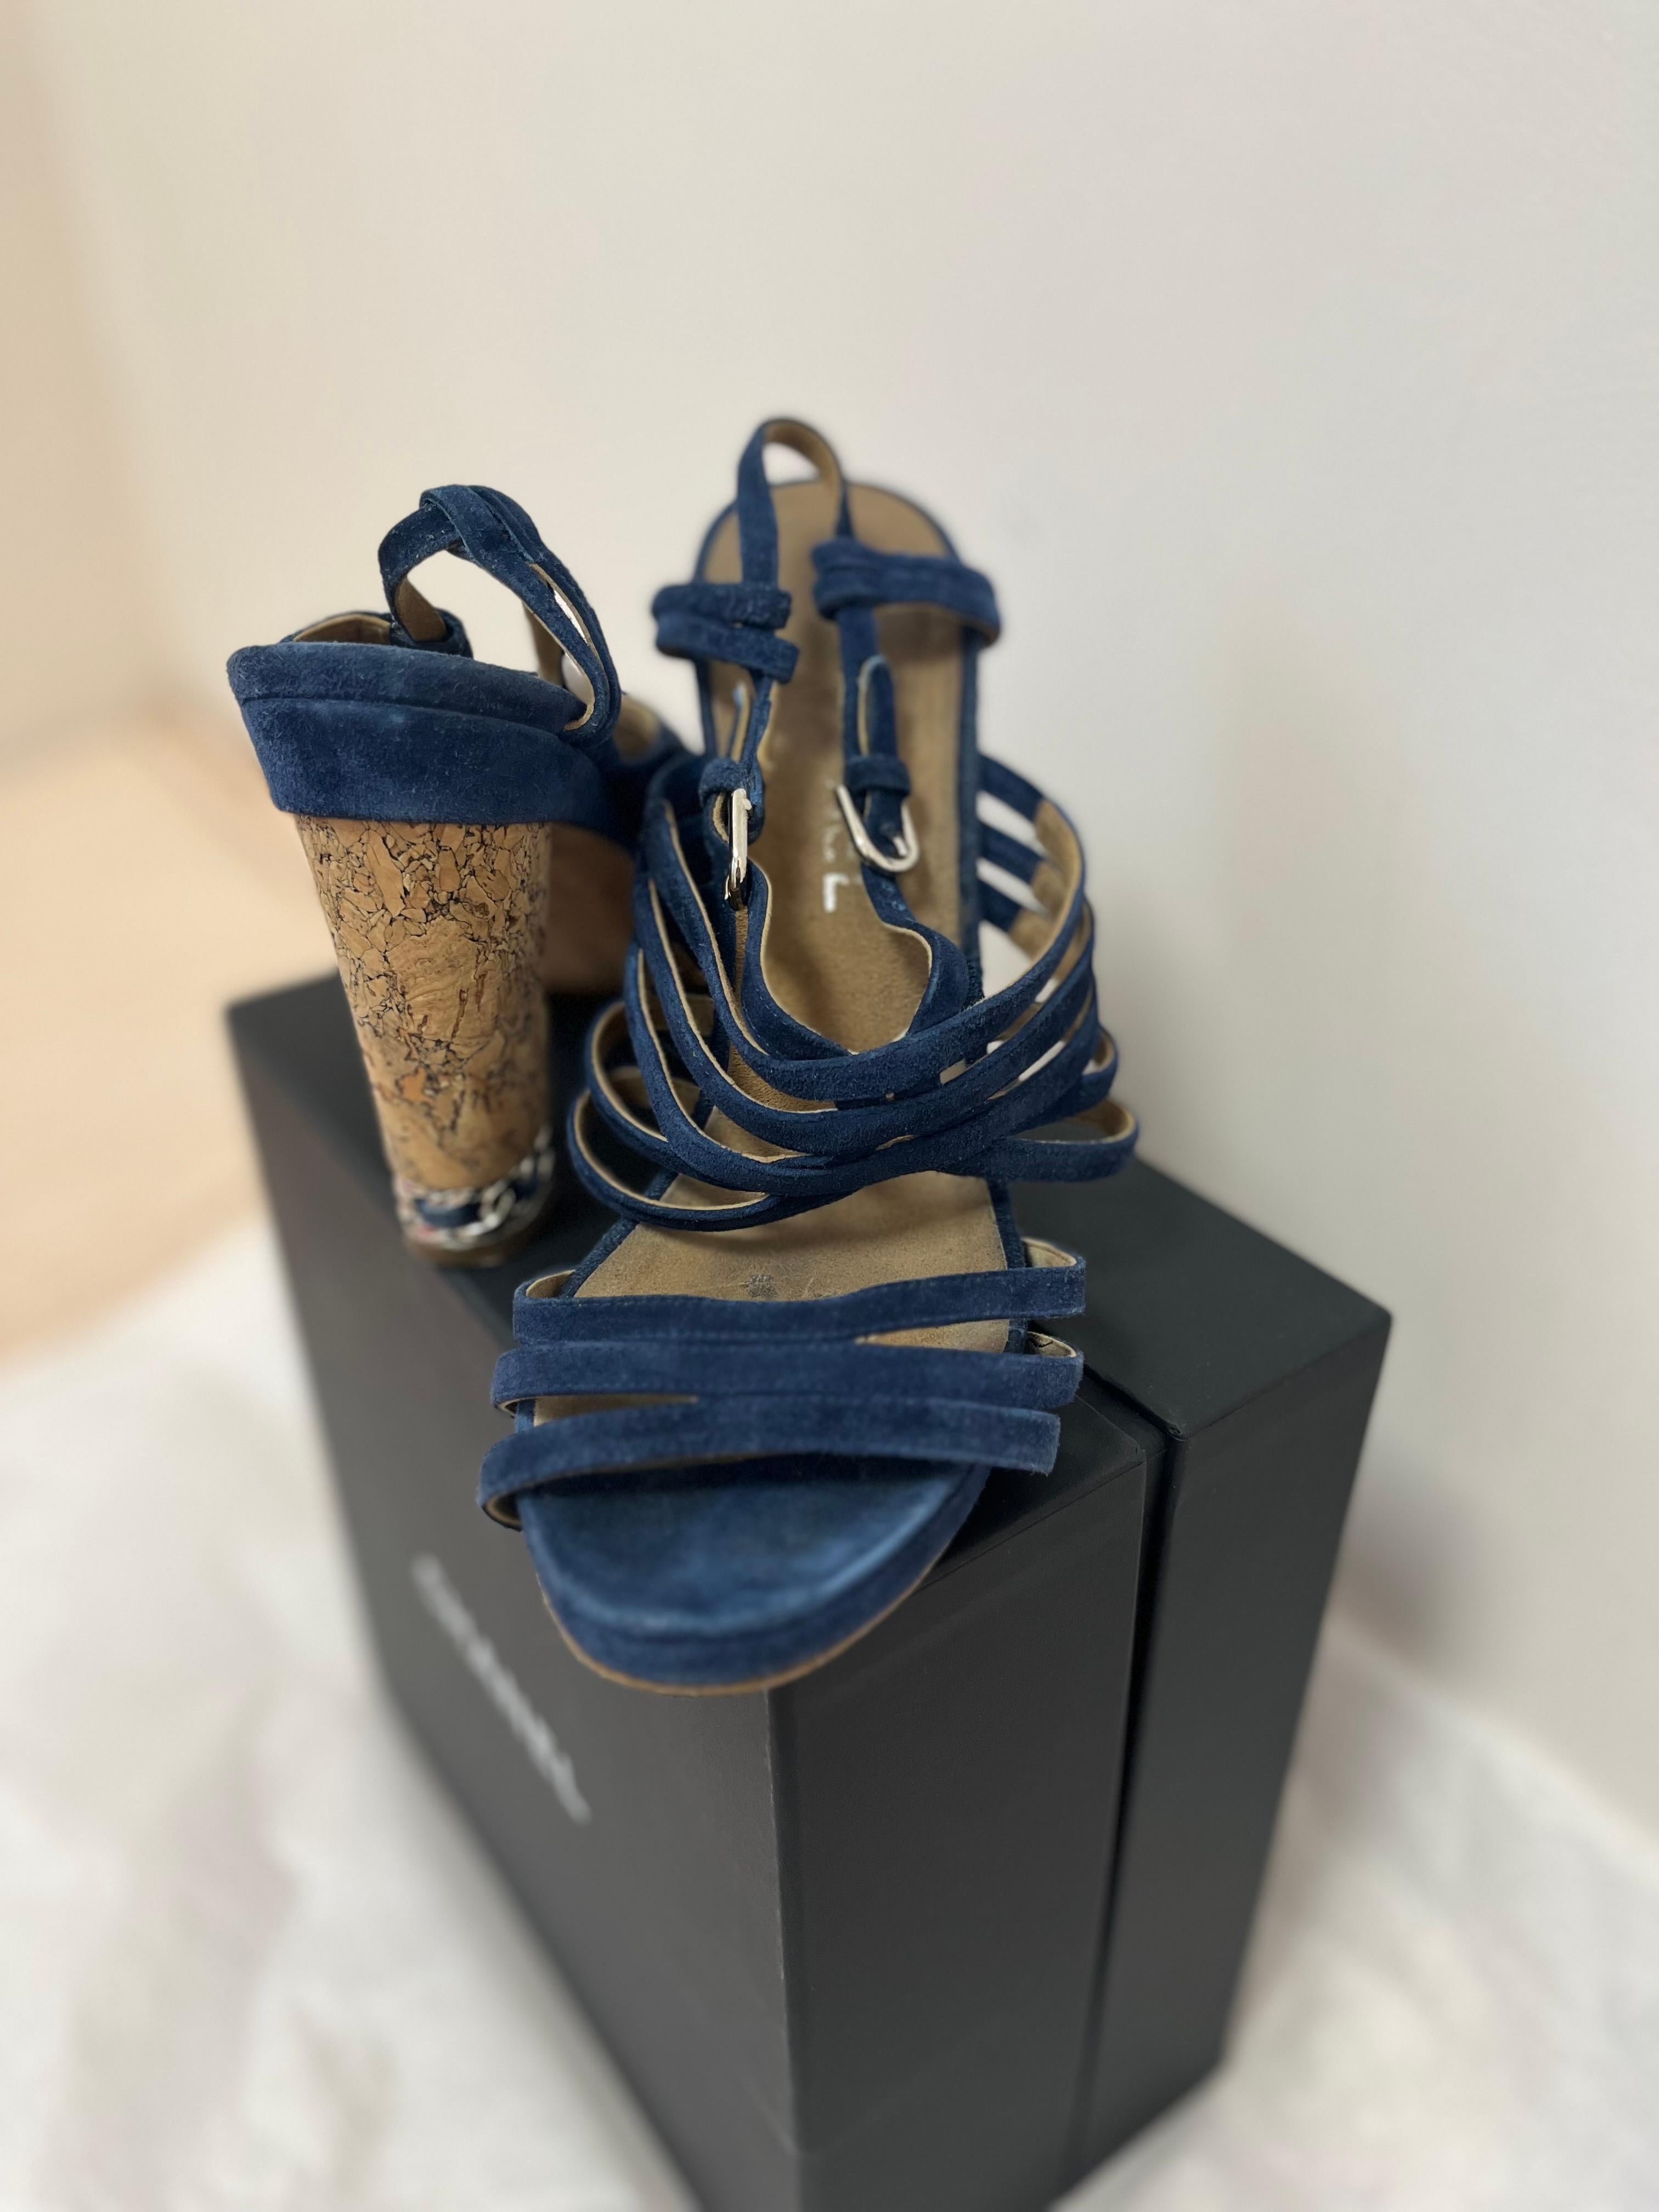 Elegant Chanel blue suede sandals/shoes in good condition. The wear is on the soles. Although they have heels these are very comfortable. The heels are made of cork with braided silver-tone metal and and blue suede at the bottom. There are also 